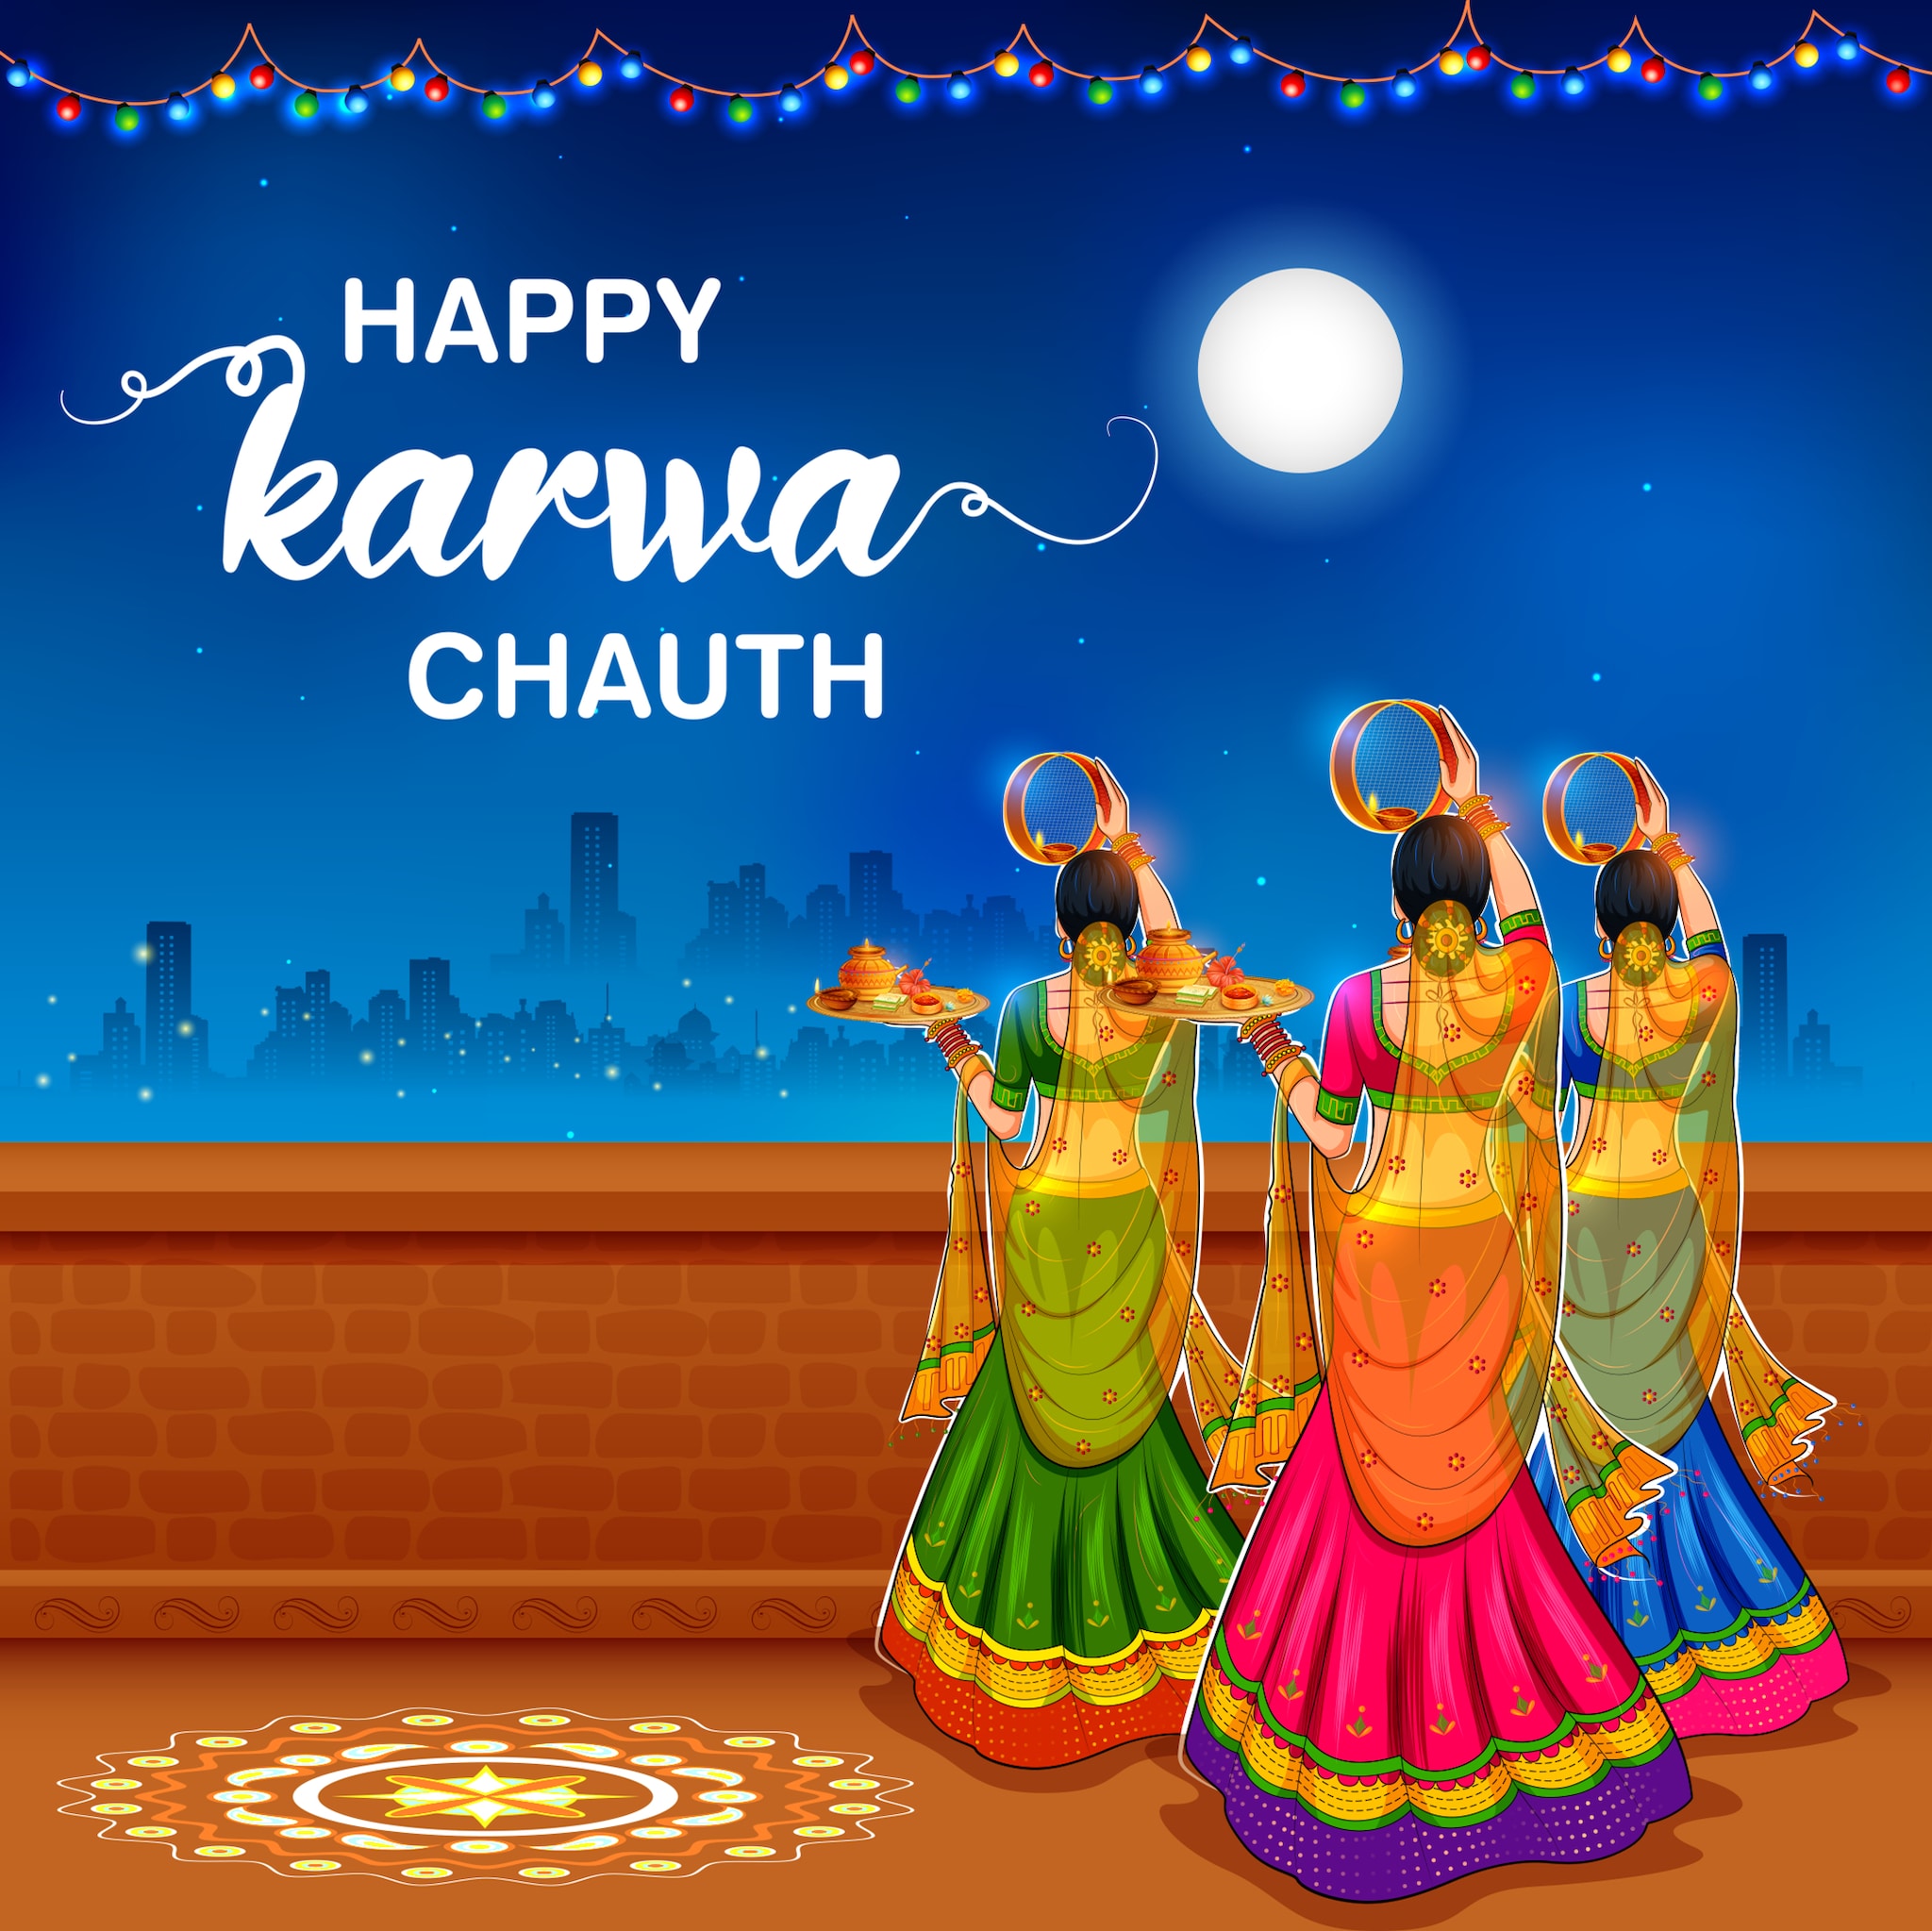 Happy Karwa Chauth 2022 Wishes, Greetings, Whatsapp Status, Images And Quotes You Can Share With Your Dear Ones. (Image: Shutterstock) 